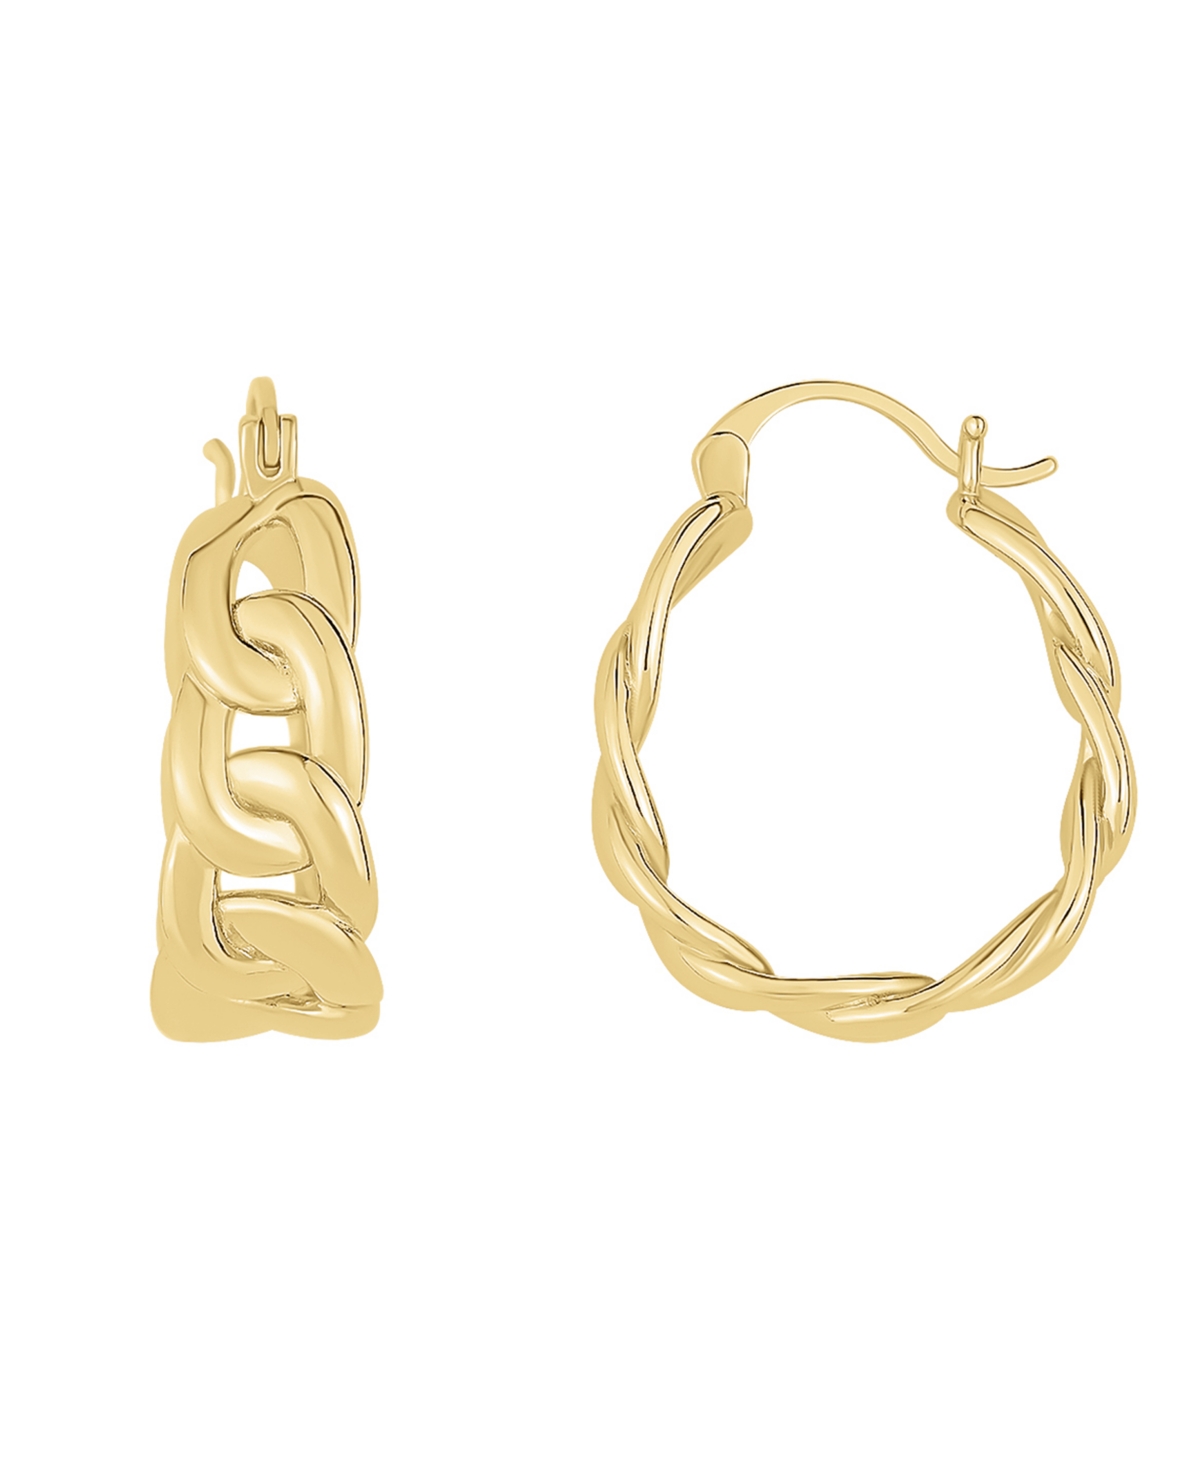 And Now This 18k Gold Plated Curb Chain Hoop Earring In K Gold Plated Over Brass